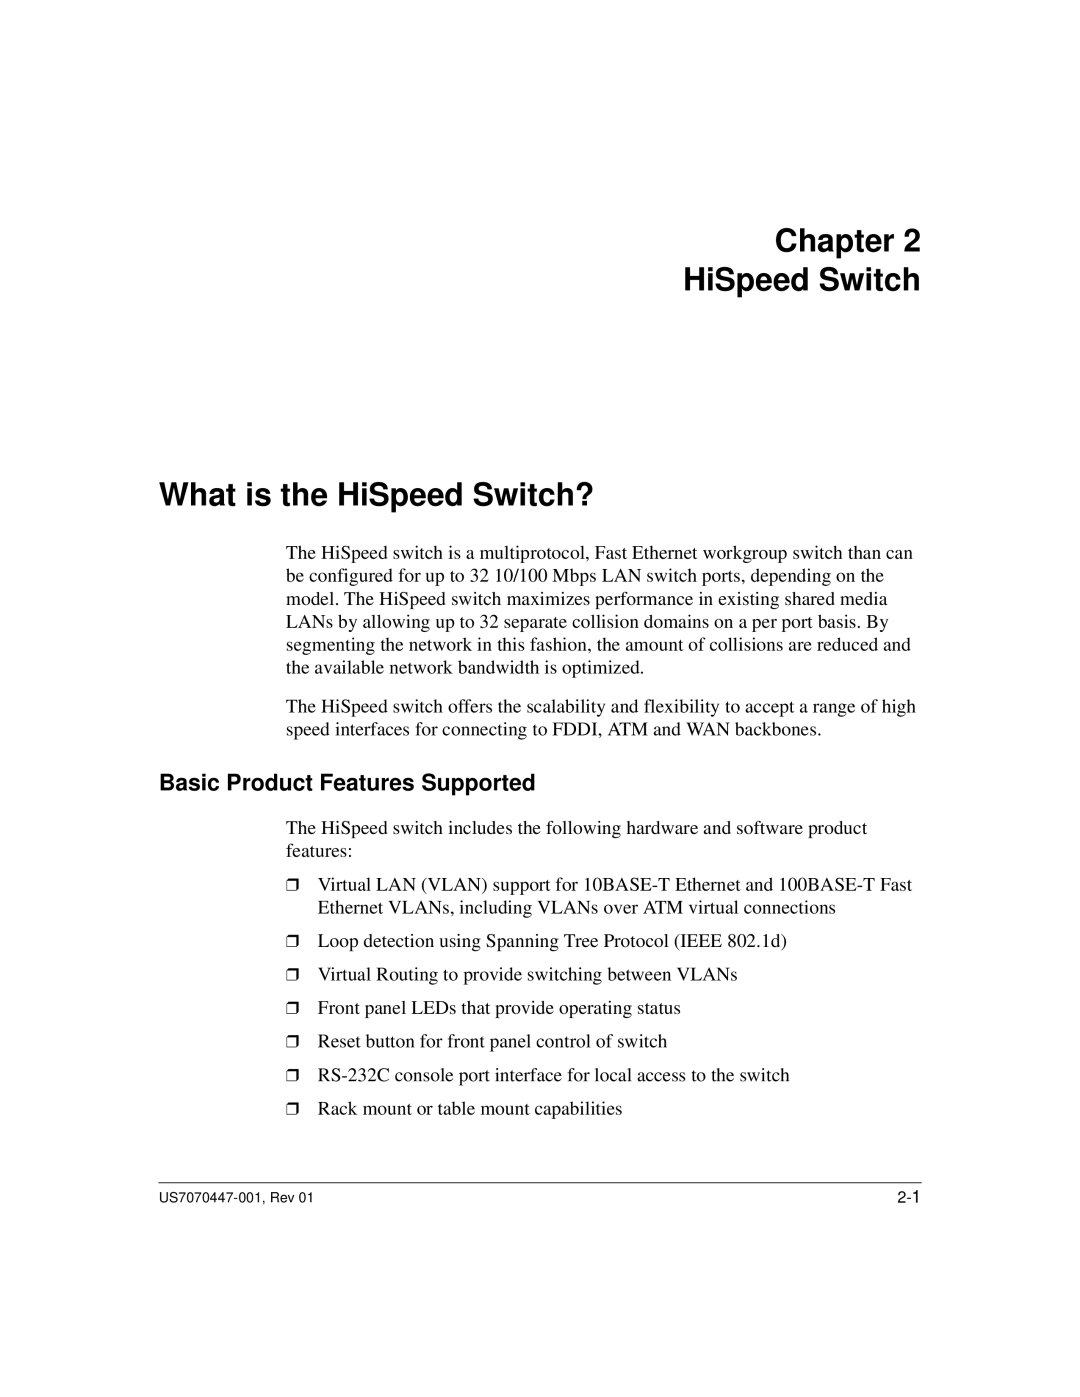 Hitachi US7070447-001 manual Chapter HiSpeed Switch What is the HiSpeed Switch?, Basic Product Features Supported 